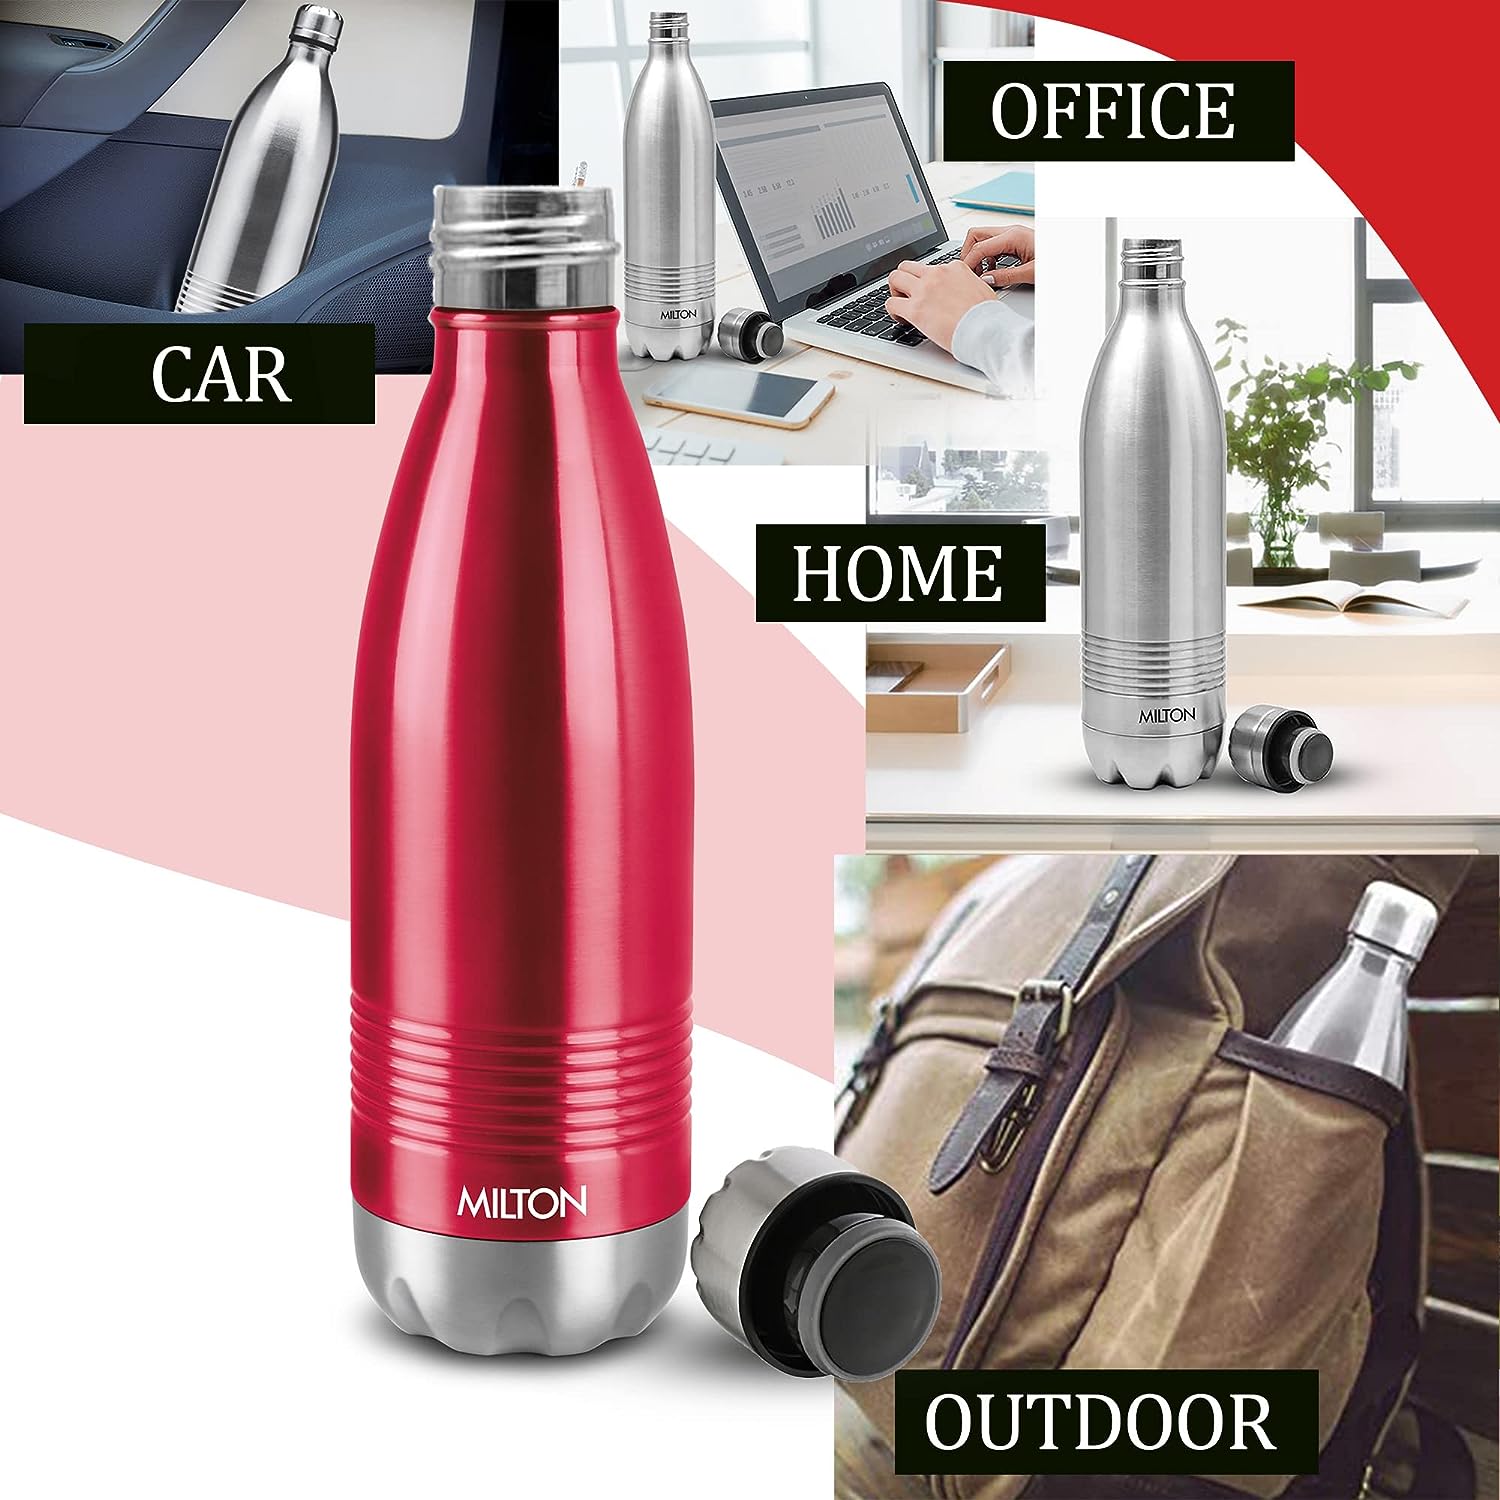 Milton Duo Deluxe-750 Thermosteel Bottle Hot & Cold Vacuum Insulated Water Tea Coffee Flask, 700 ML, Maroon